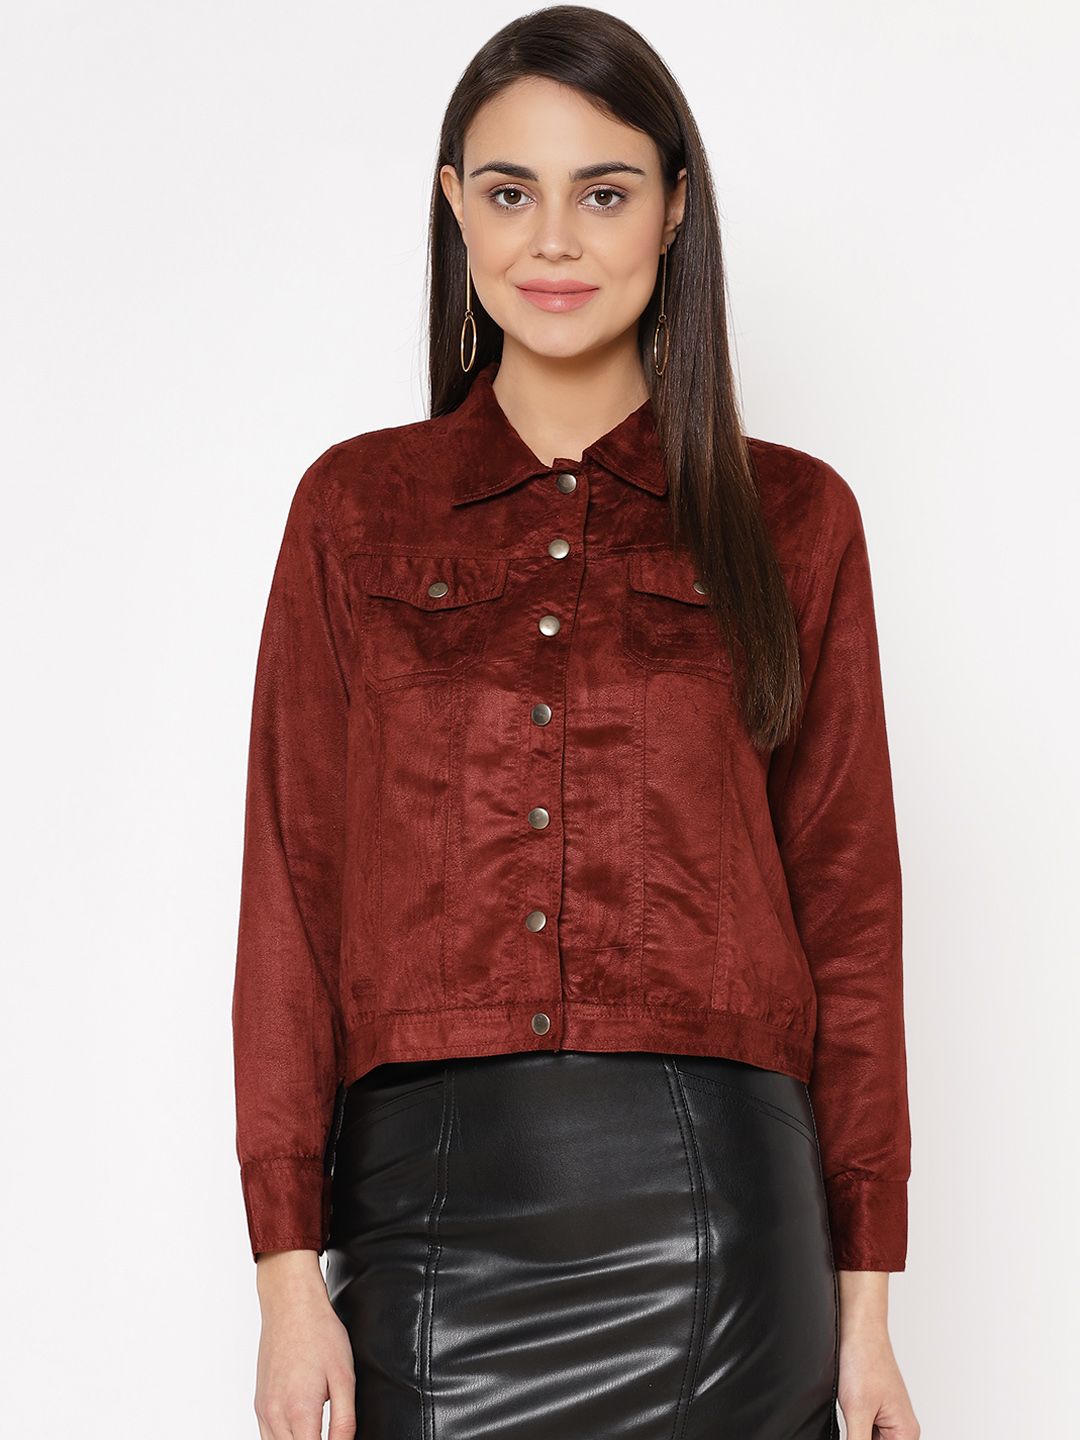 Carlton London Women Maroon Solid Tailored Jacket With Suede Finish Price in India